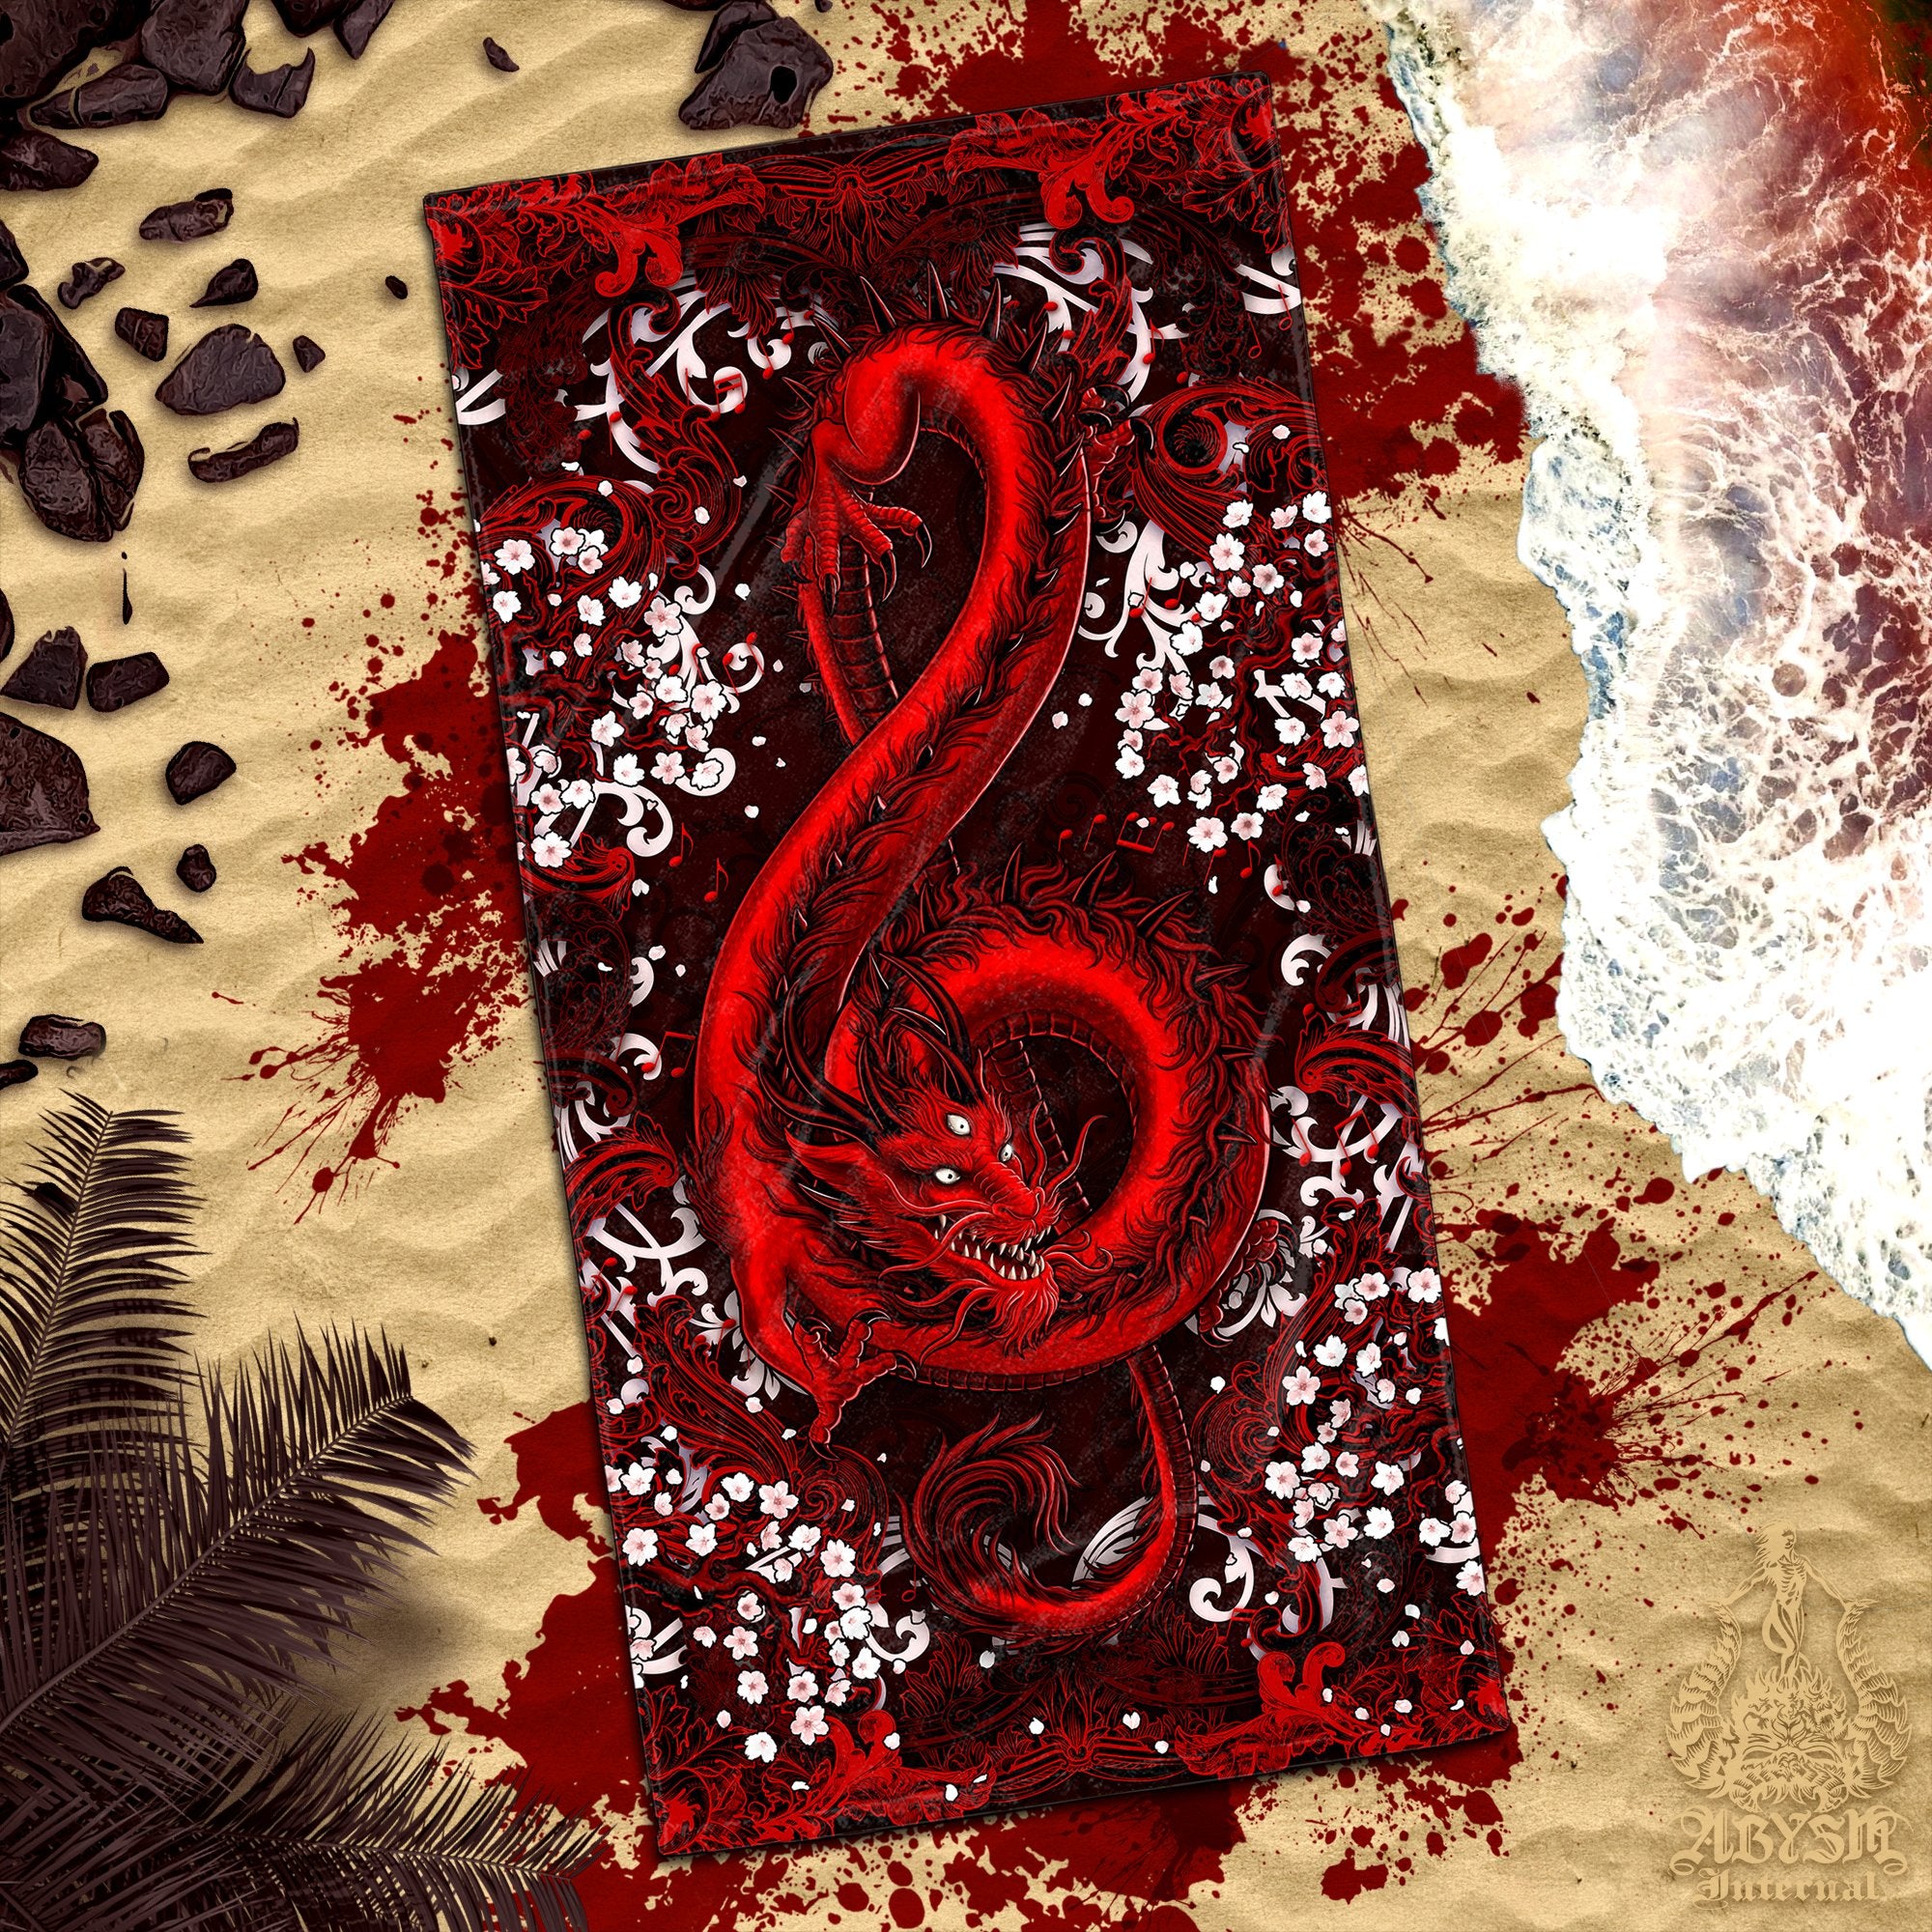 ALL Gothic Music Dragon Beach Towel, Treble Clef, Cool Gift Idea for Gamer - 10 Colors - Abysm Internal